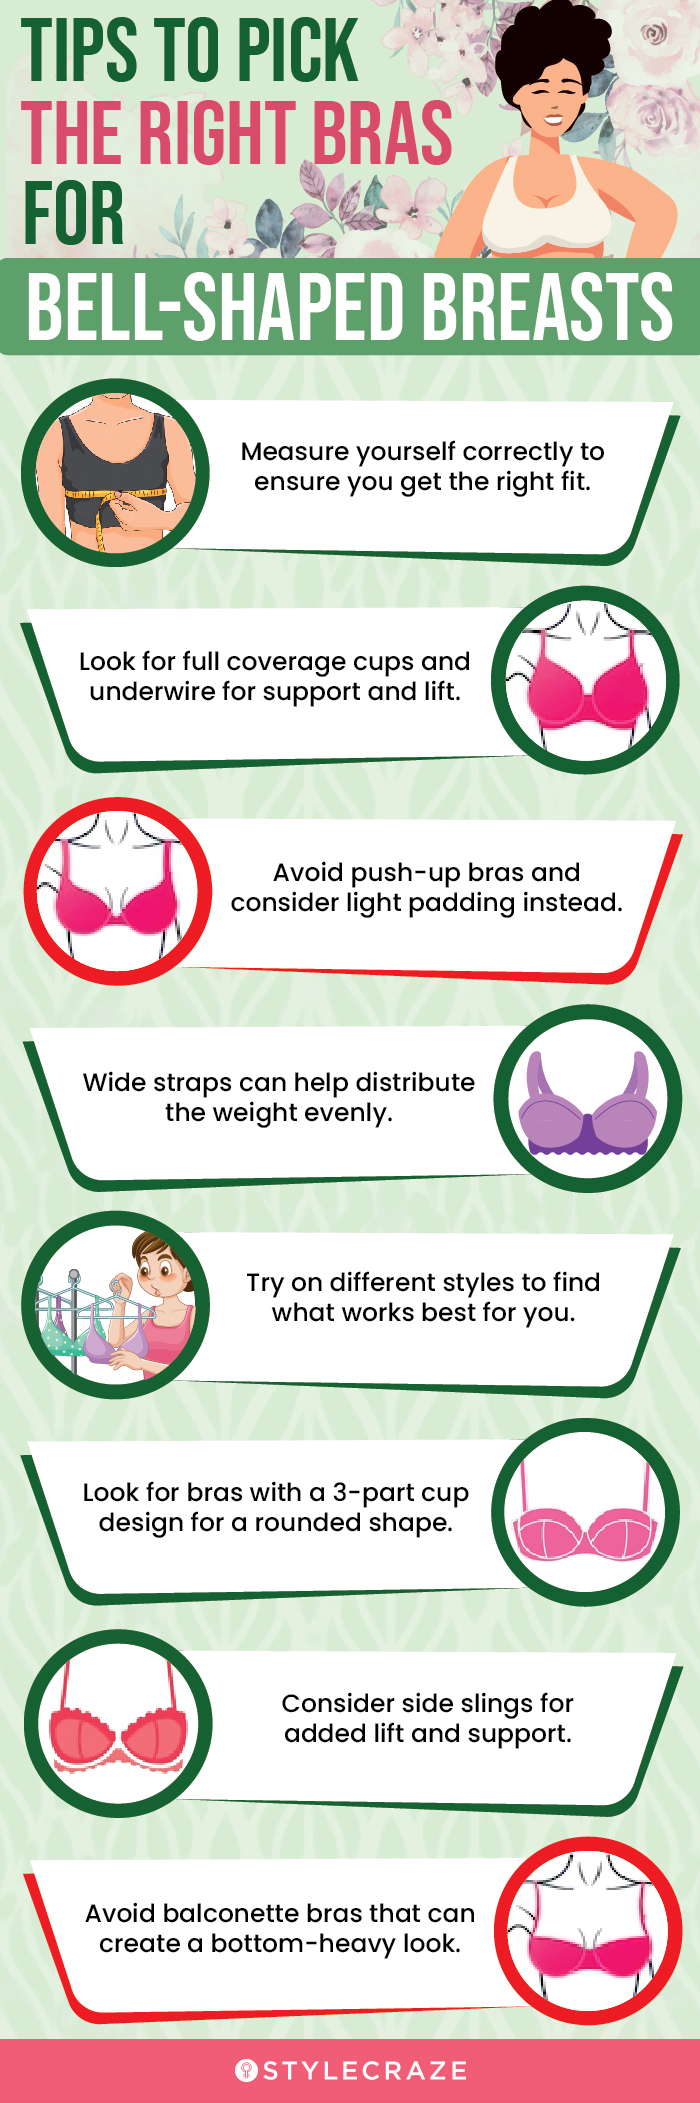 Tips To Pick The Right Bras For Bell-Shaped Breasts (infographic)